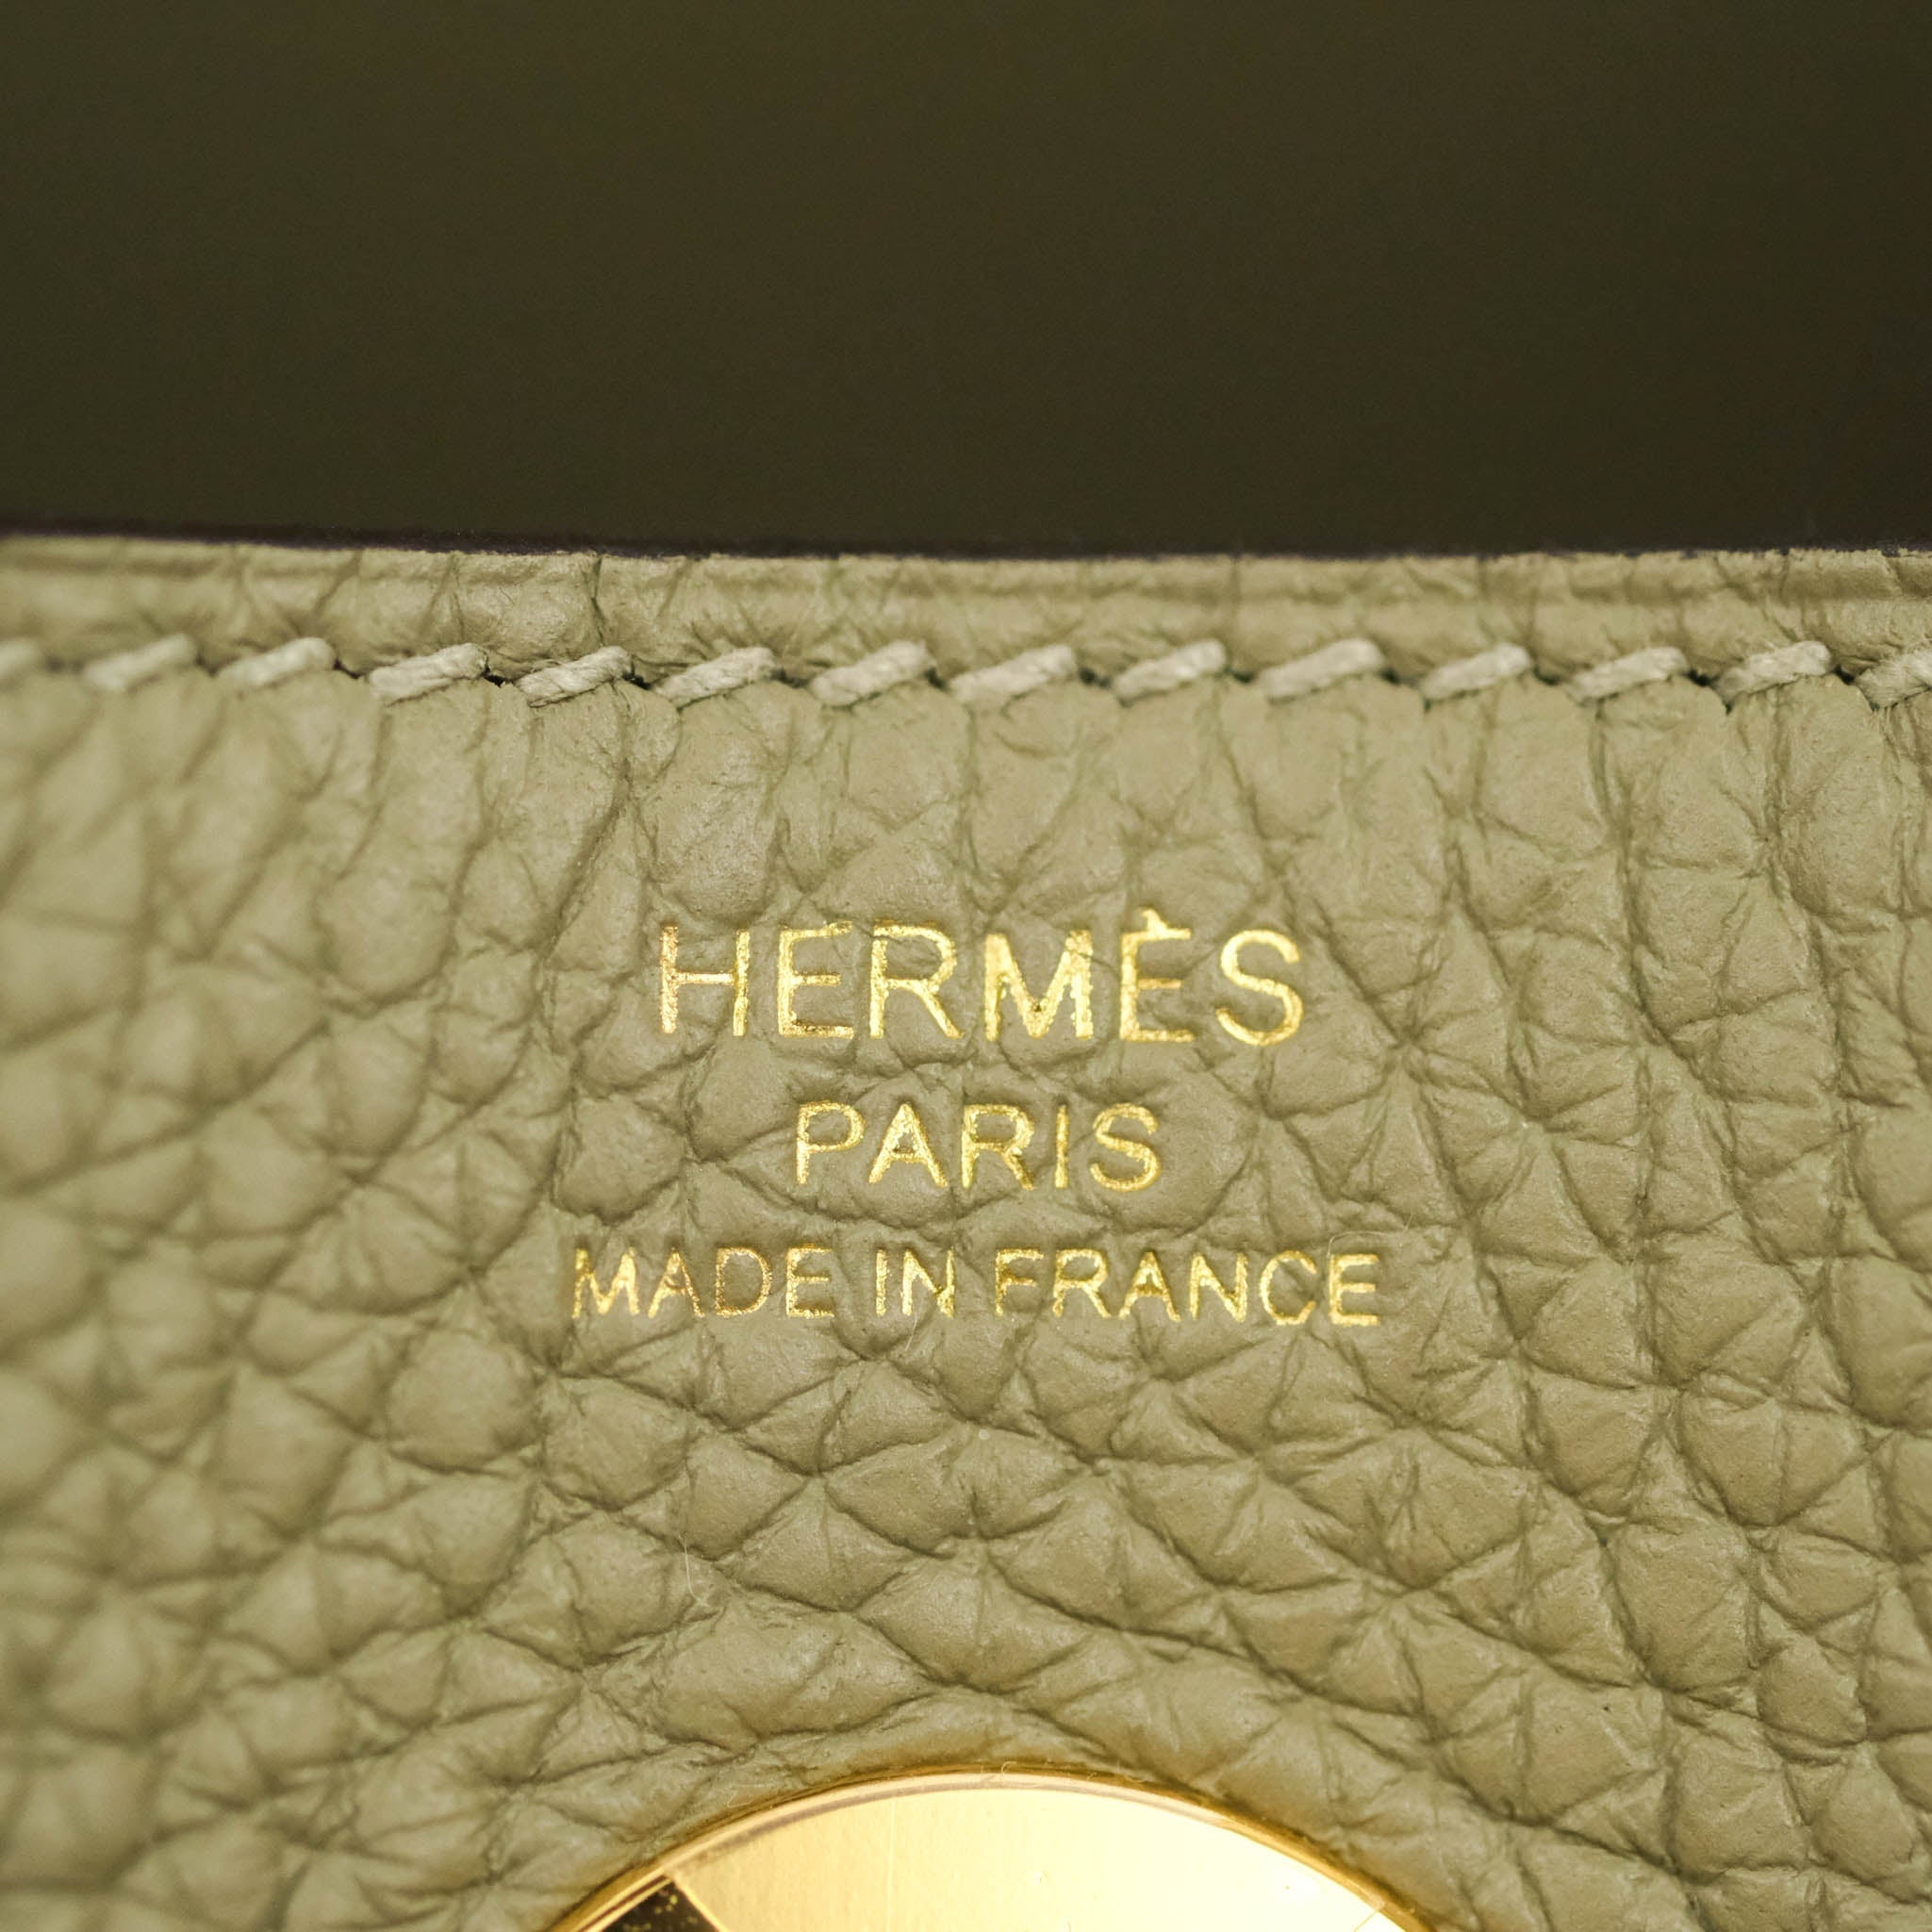 LoVey Goody - 🤤 The Most Wanted! Brand New Hermes Lindy